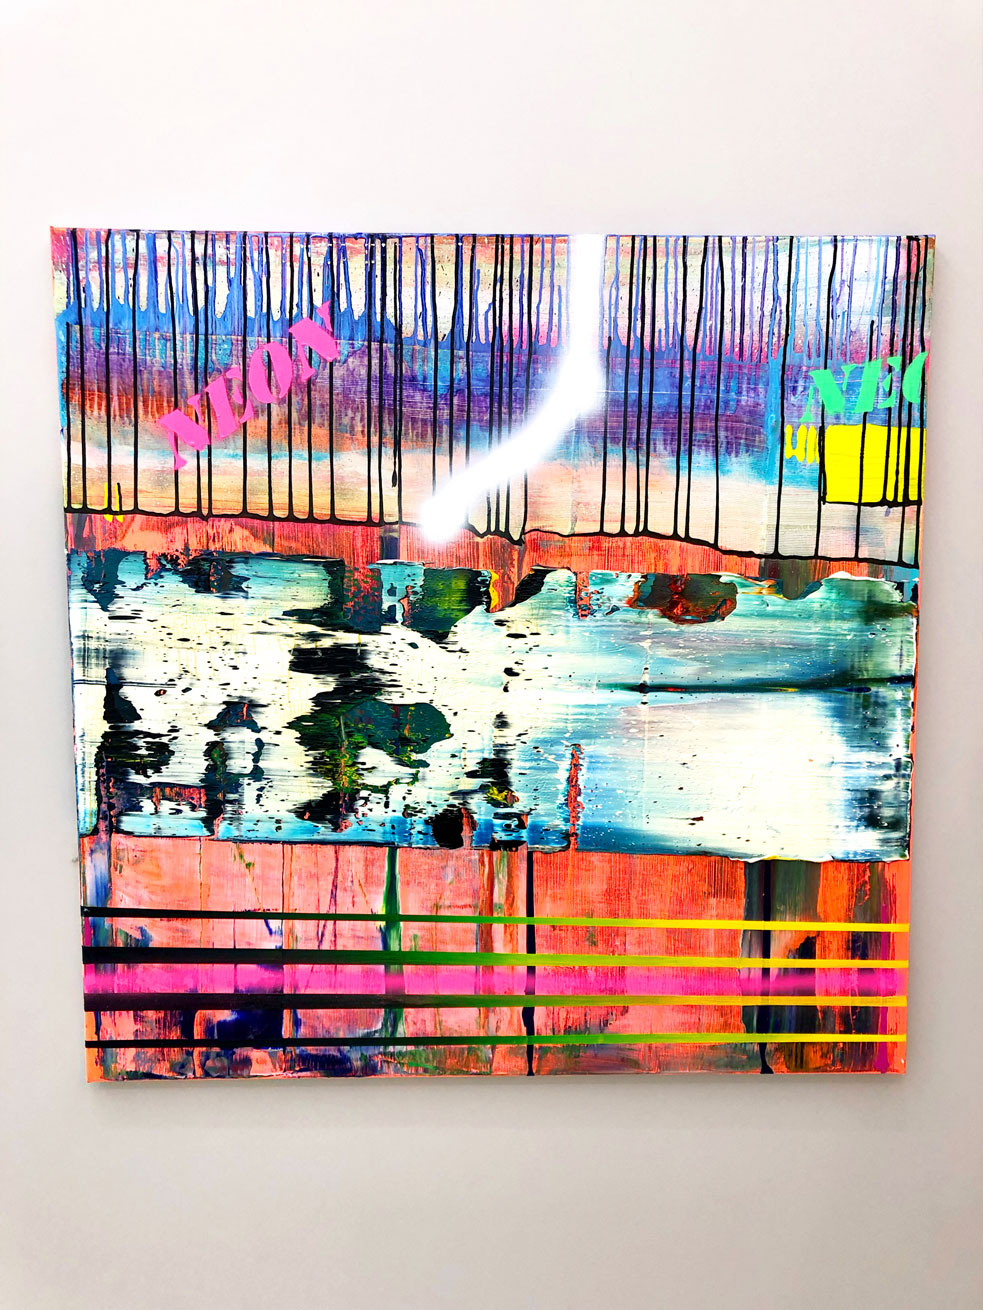 Neon-Factory 100x100cm. Oil, acrylic and spraypaint on canvas 2021